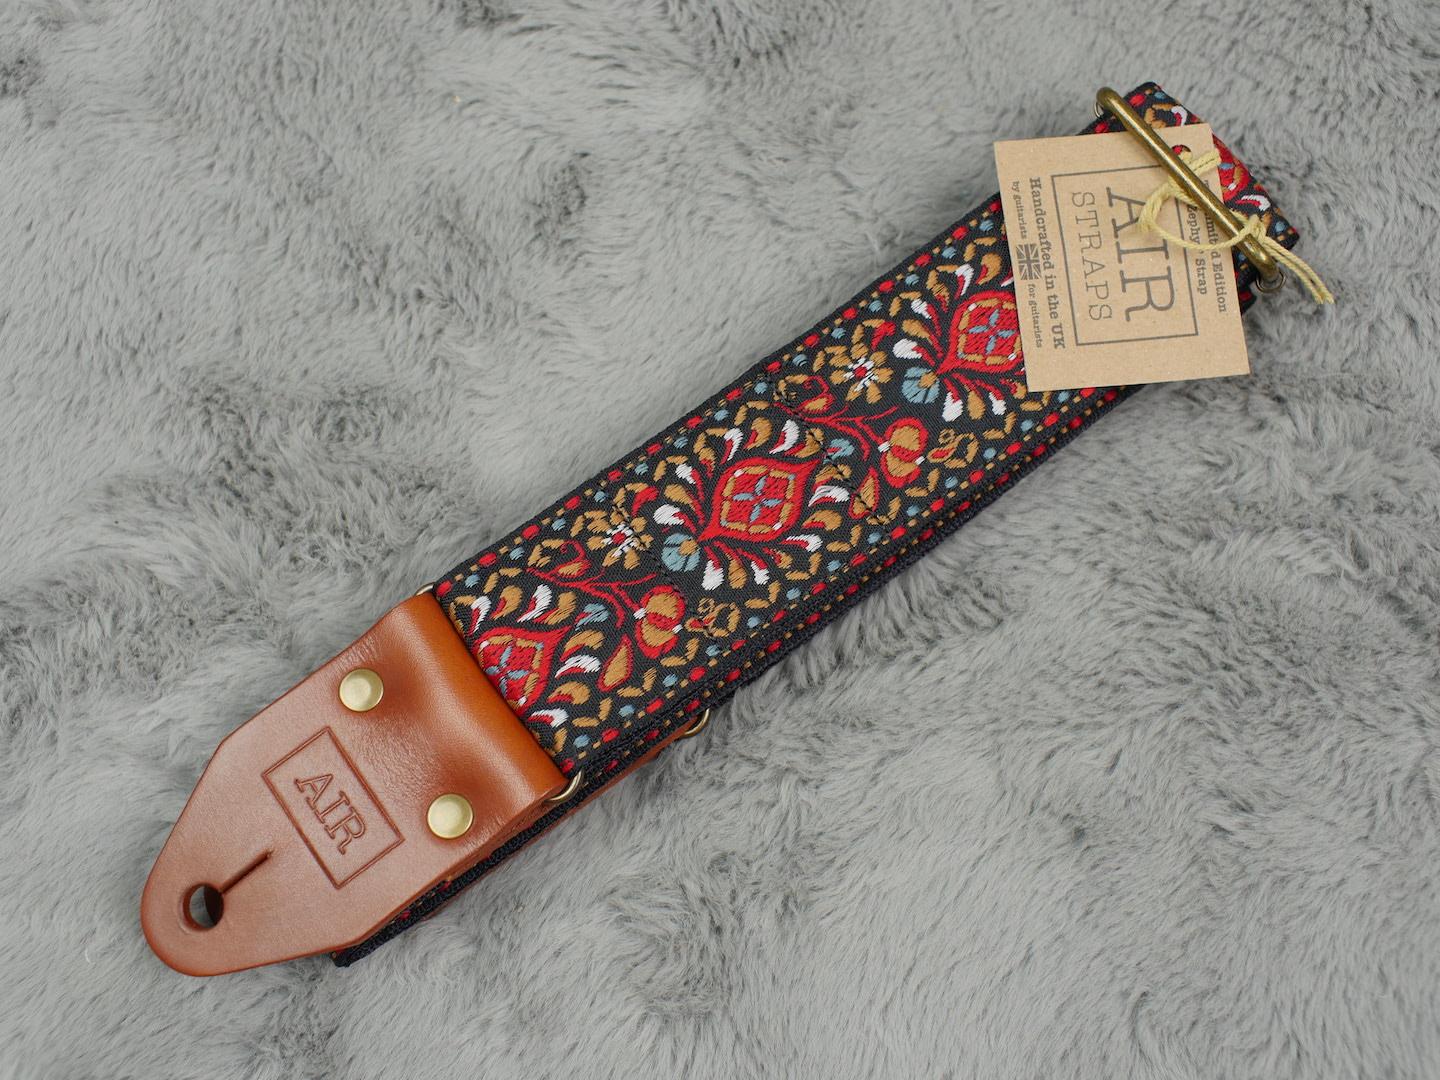 Air Straps Limited Edition 'Zephyr' Guitar Strap